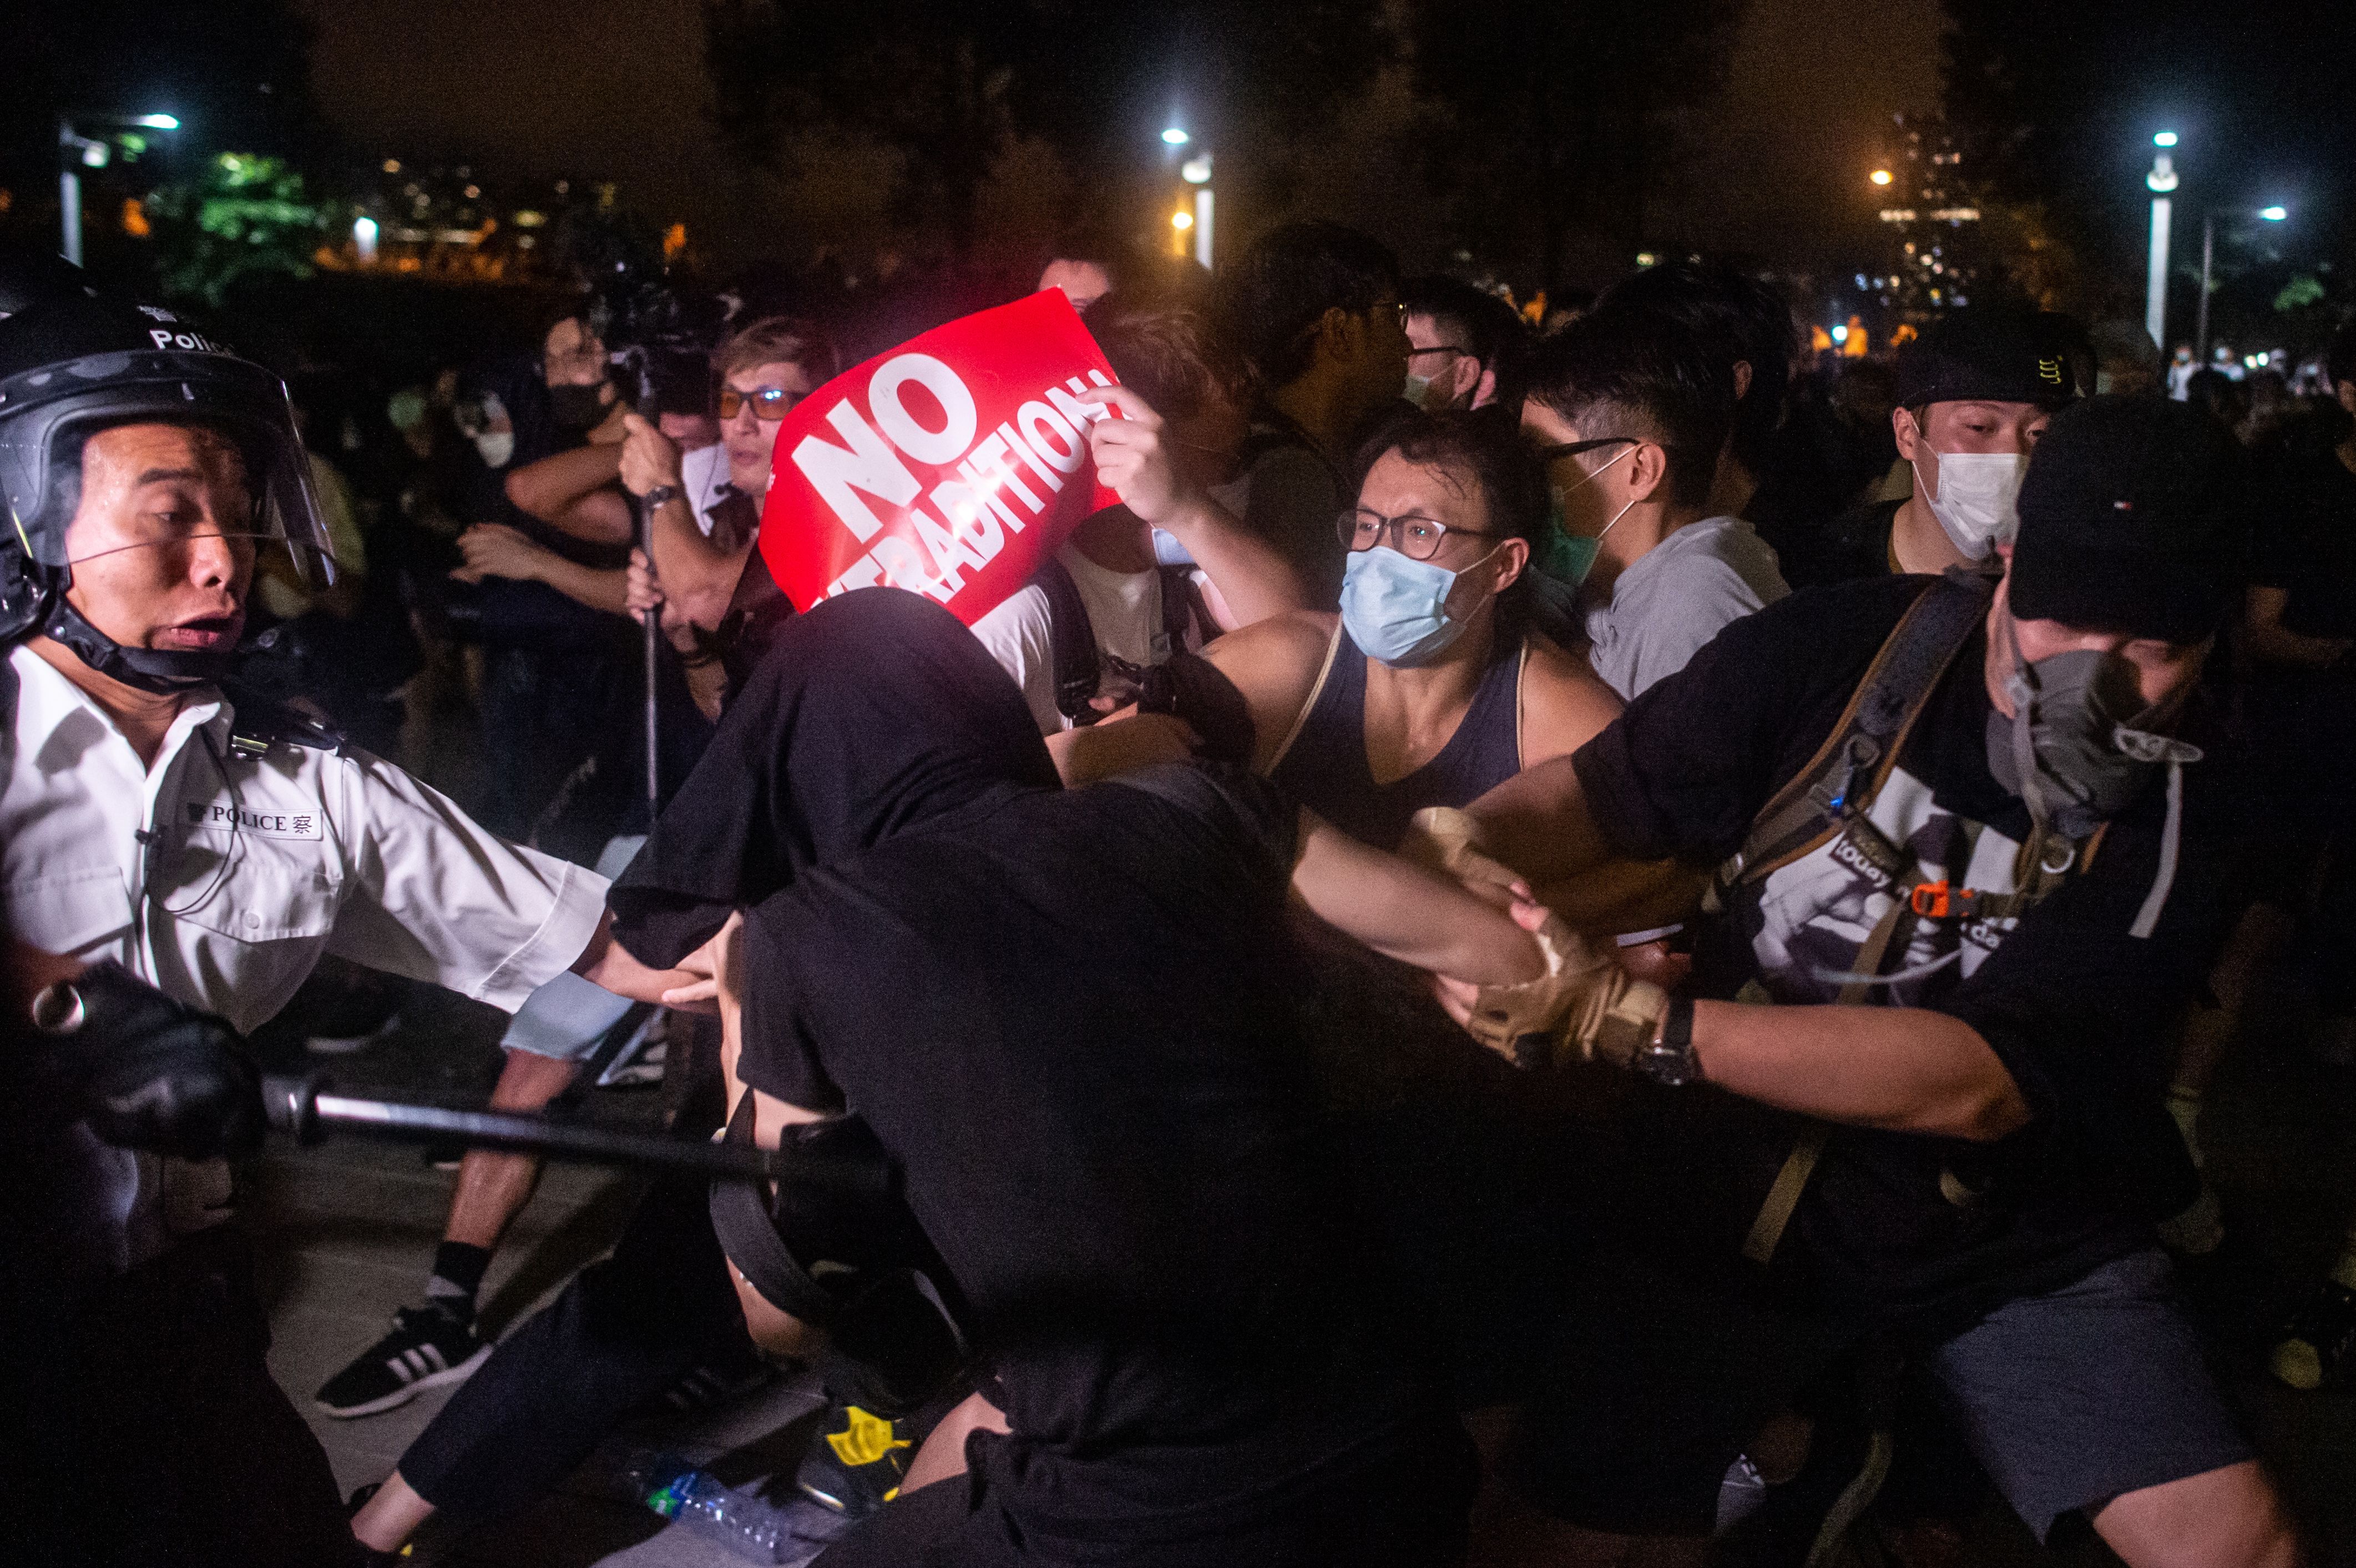 Protesters clash with the police at Legislative Council in Hong Kong after a rally against a controversial extradition law proposal in Hong Kong on early June 10, 2019.